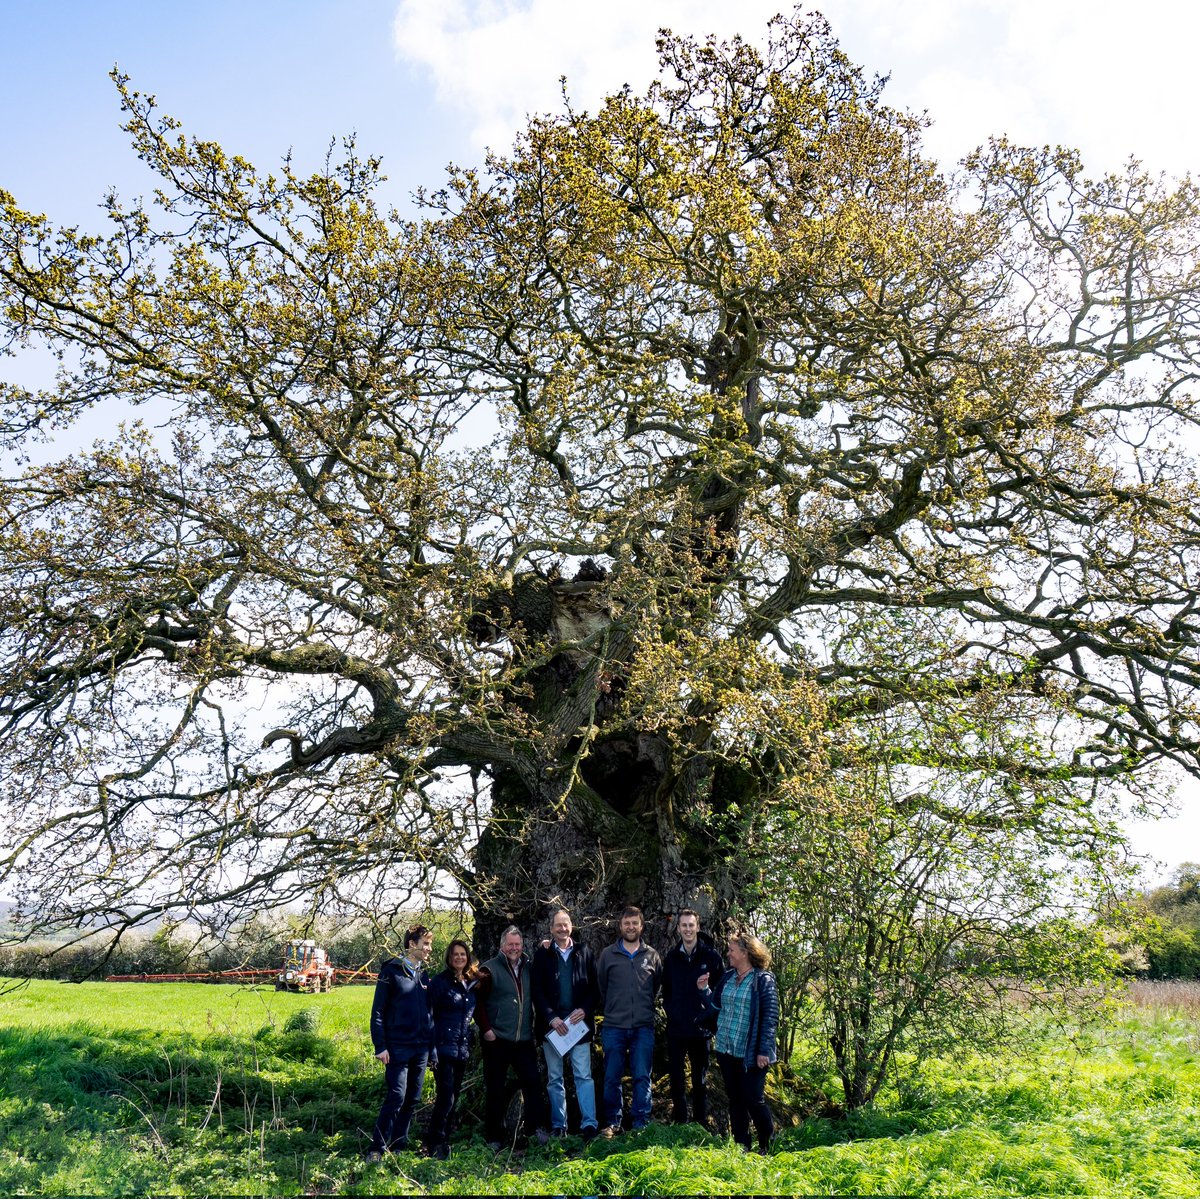 Arboriculture plays an essential role in protecting oak trees, but did you know that despite being a vital part of the tree management family, there is a succession crisis in arboriculture? Find out more: actionoak.org/news/the-essen… #PlantHealthWeek #DayOfAction